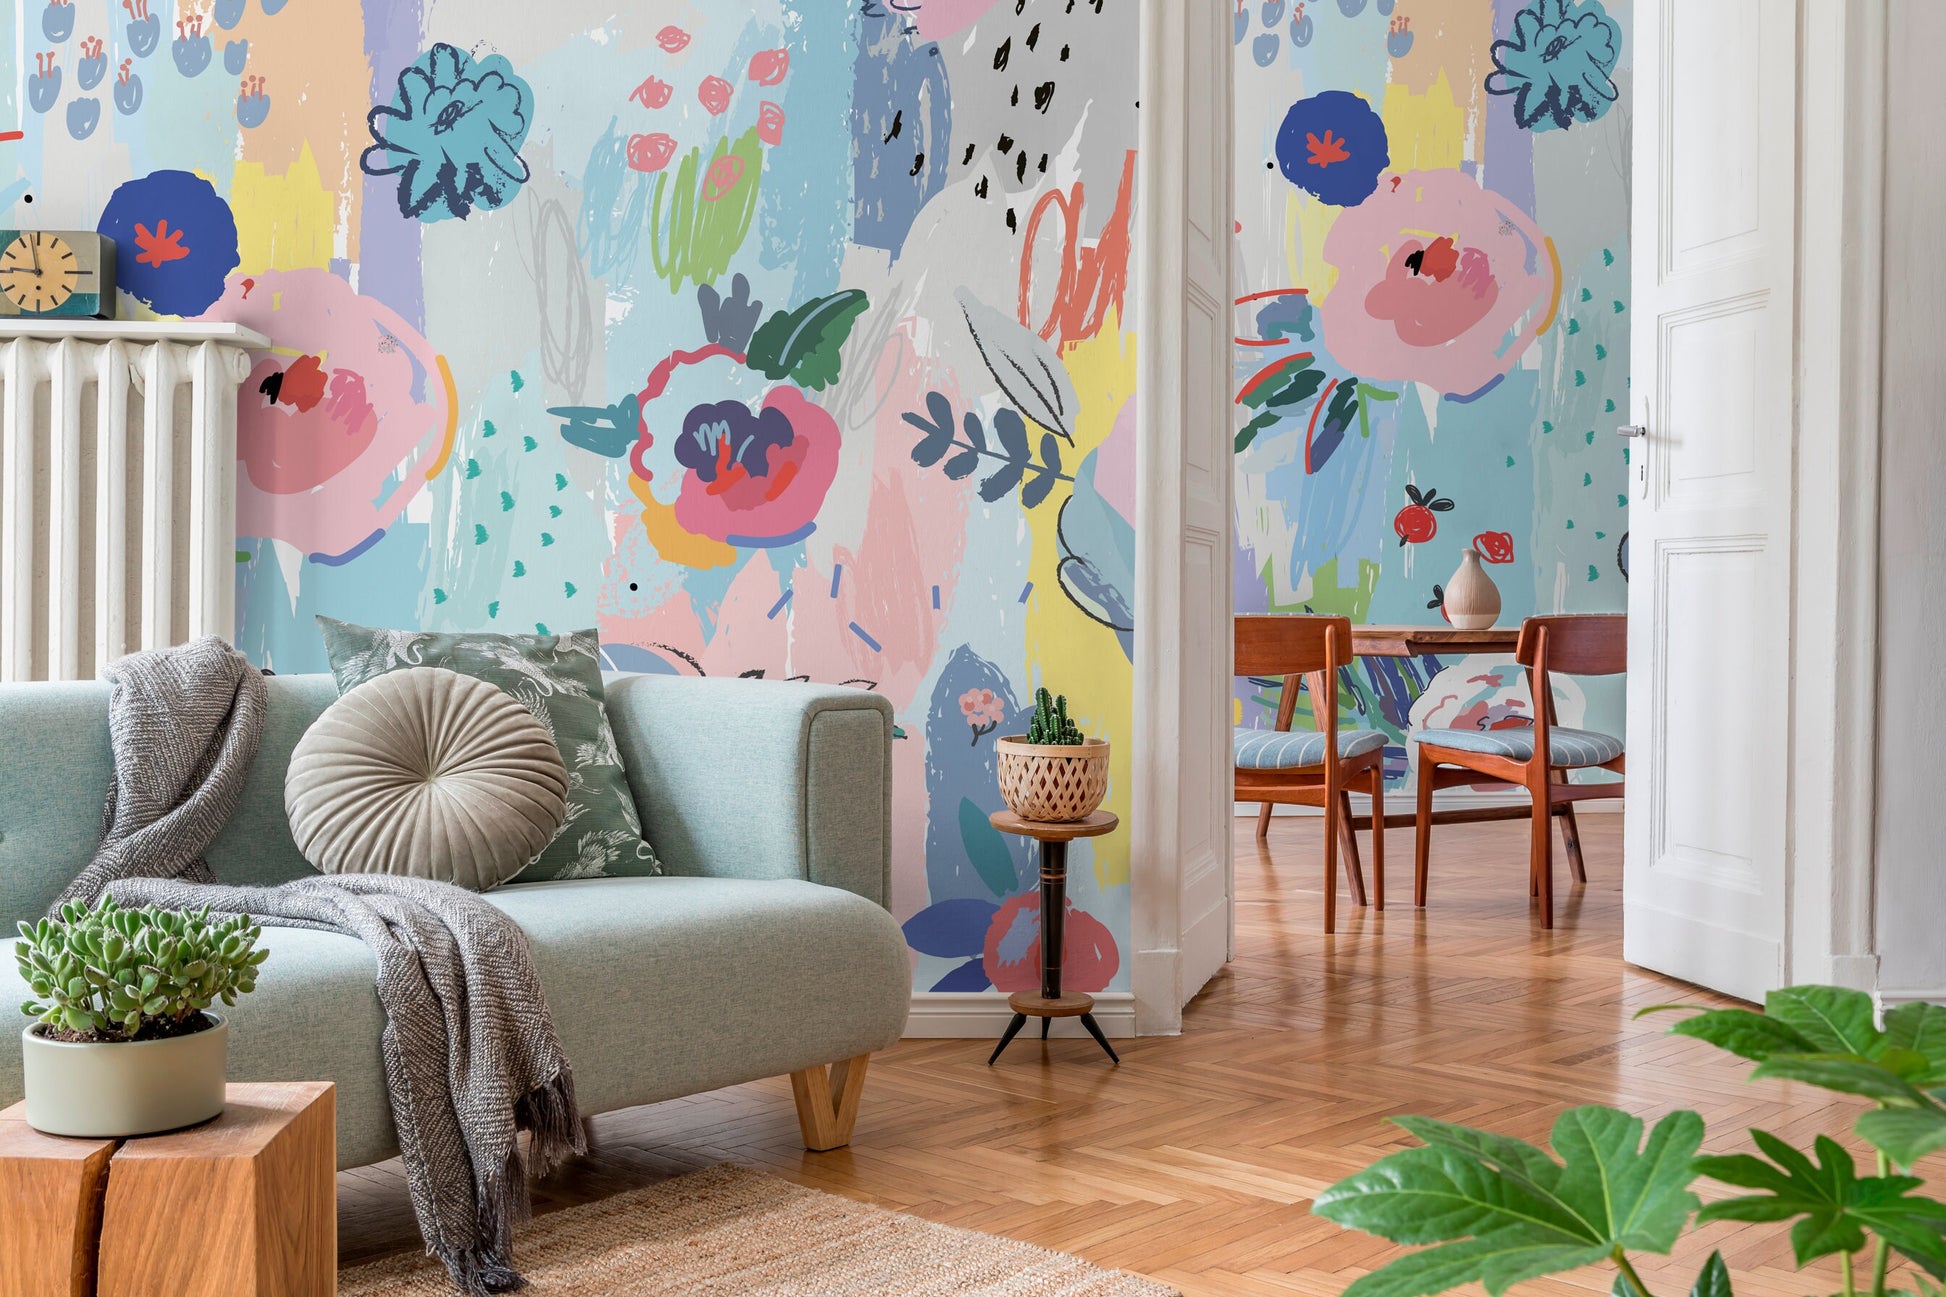 Removable Wallpaper Wallpaper Temporary Wallpaper Peel and Stick Wallpaper Colorful Wall Paper Mural - AS1-B483